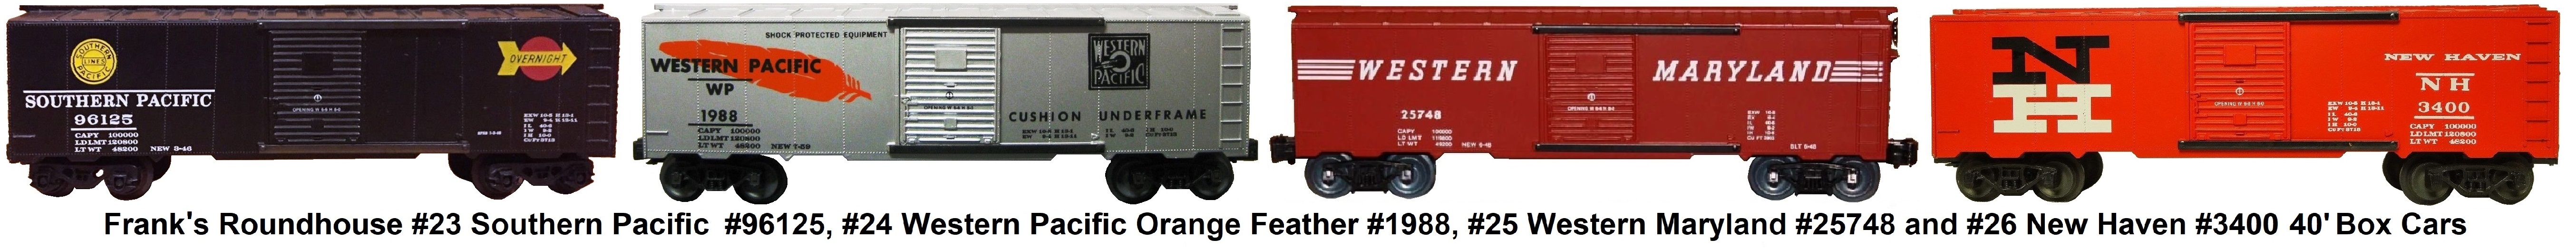 Frank's Roundhouse 'O' gauge 40' Box Cars